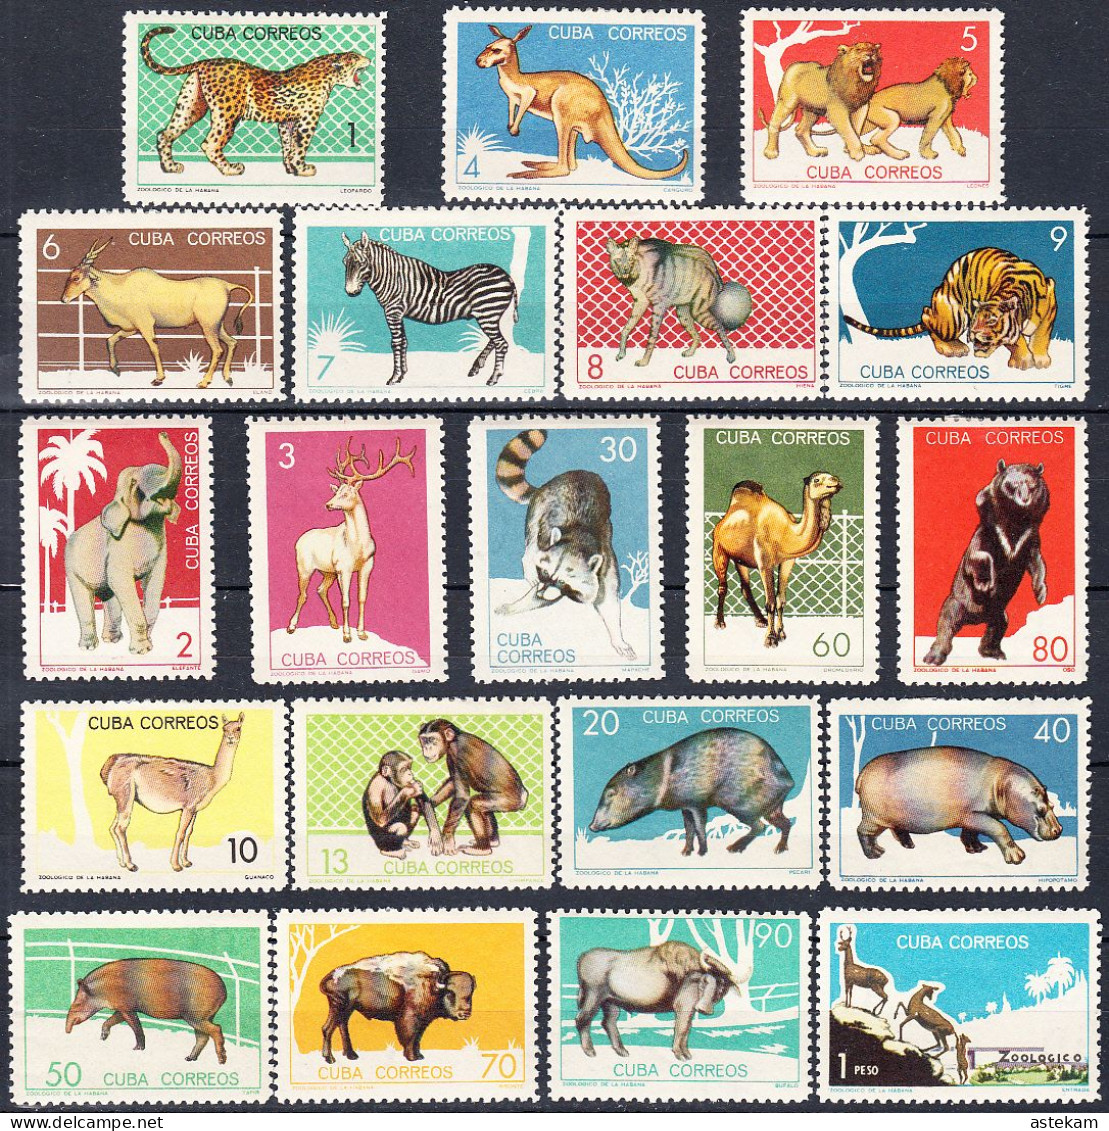 CUBA 1964, FAUNA, WILD ANIMALS From The HAVANA ZOO, COMPLETE MNH SERIES With ORIGINAL GLUE And PATCHES In GOOD QUALITY - Oblitérés